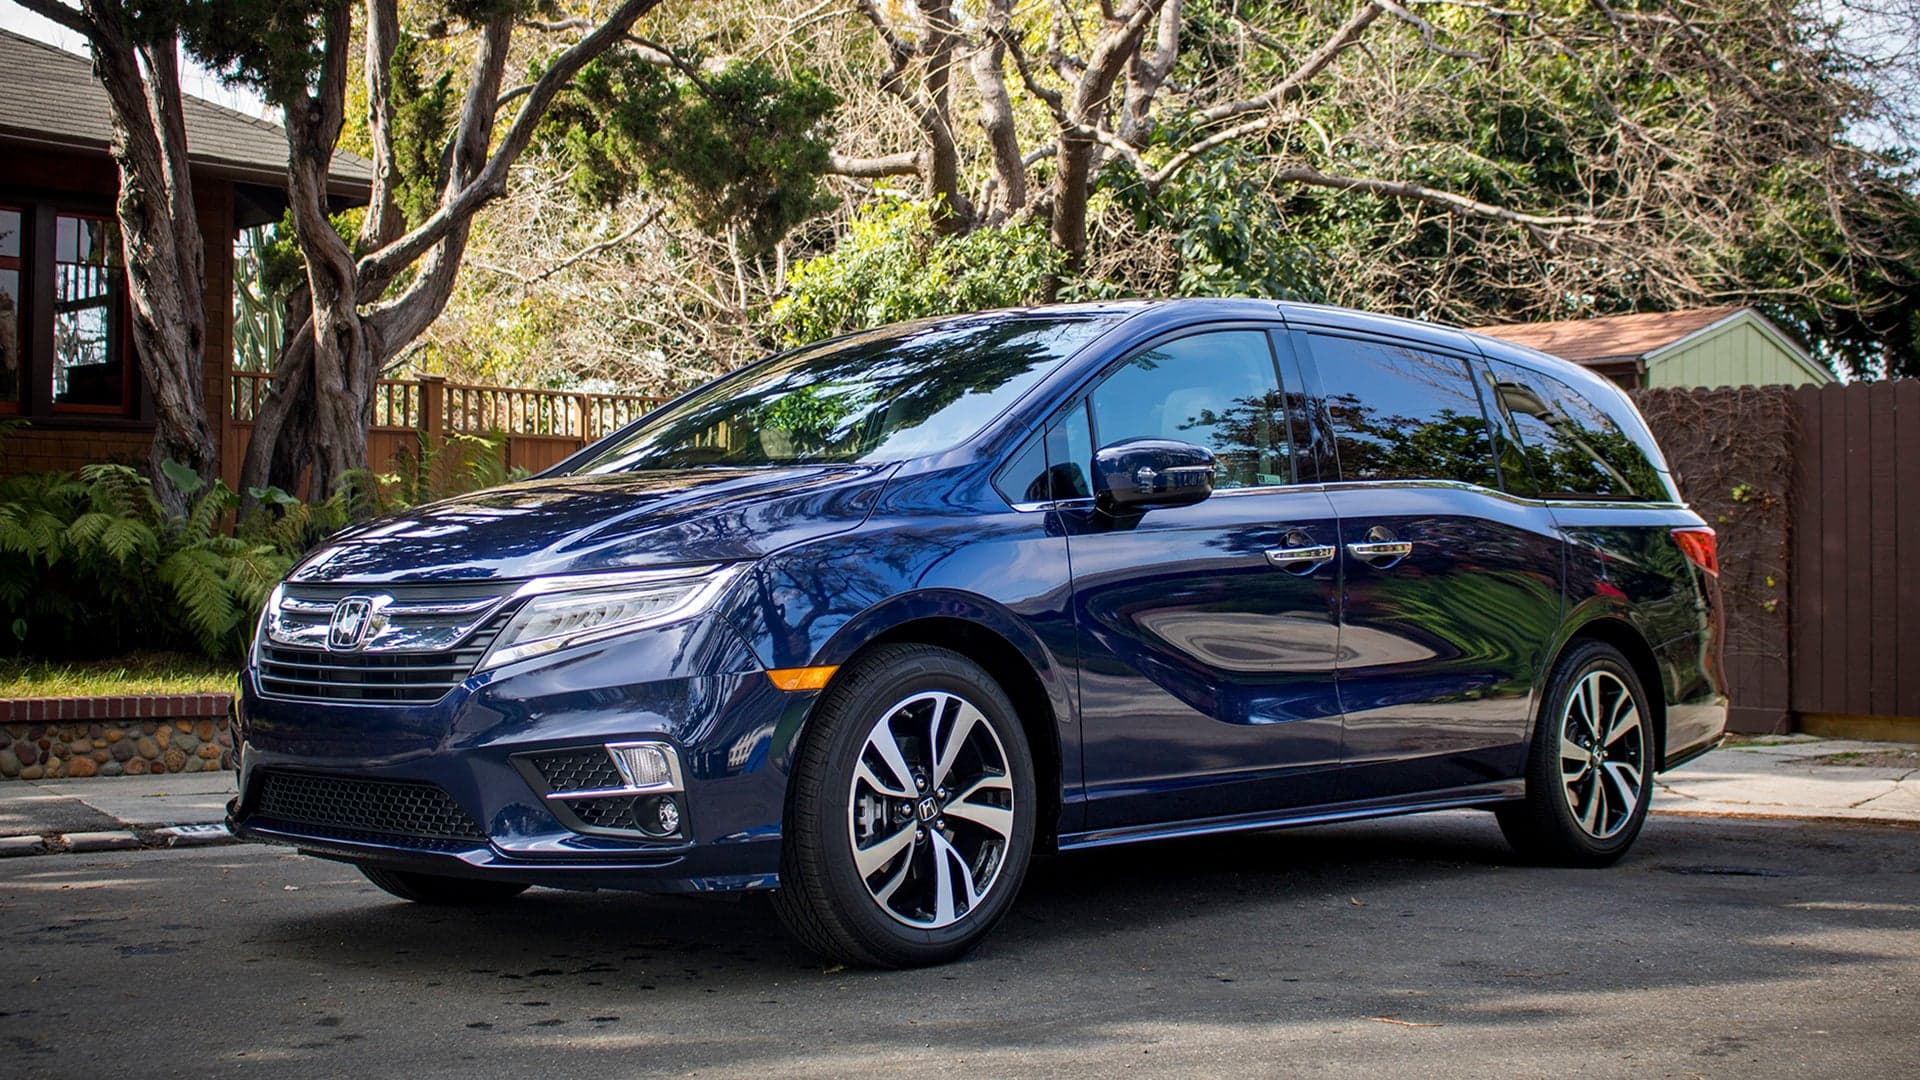 2019 Honda Odyssey Elite Review: The Minivan Grows Up, Just Like You